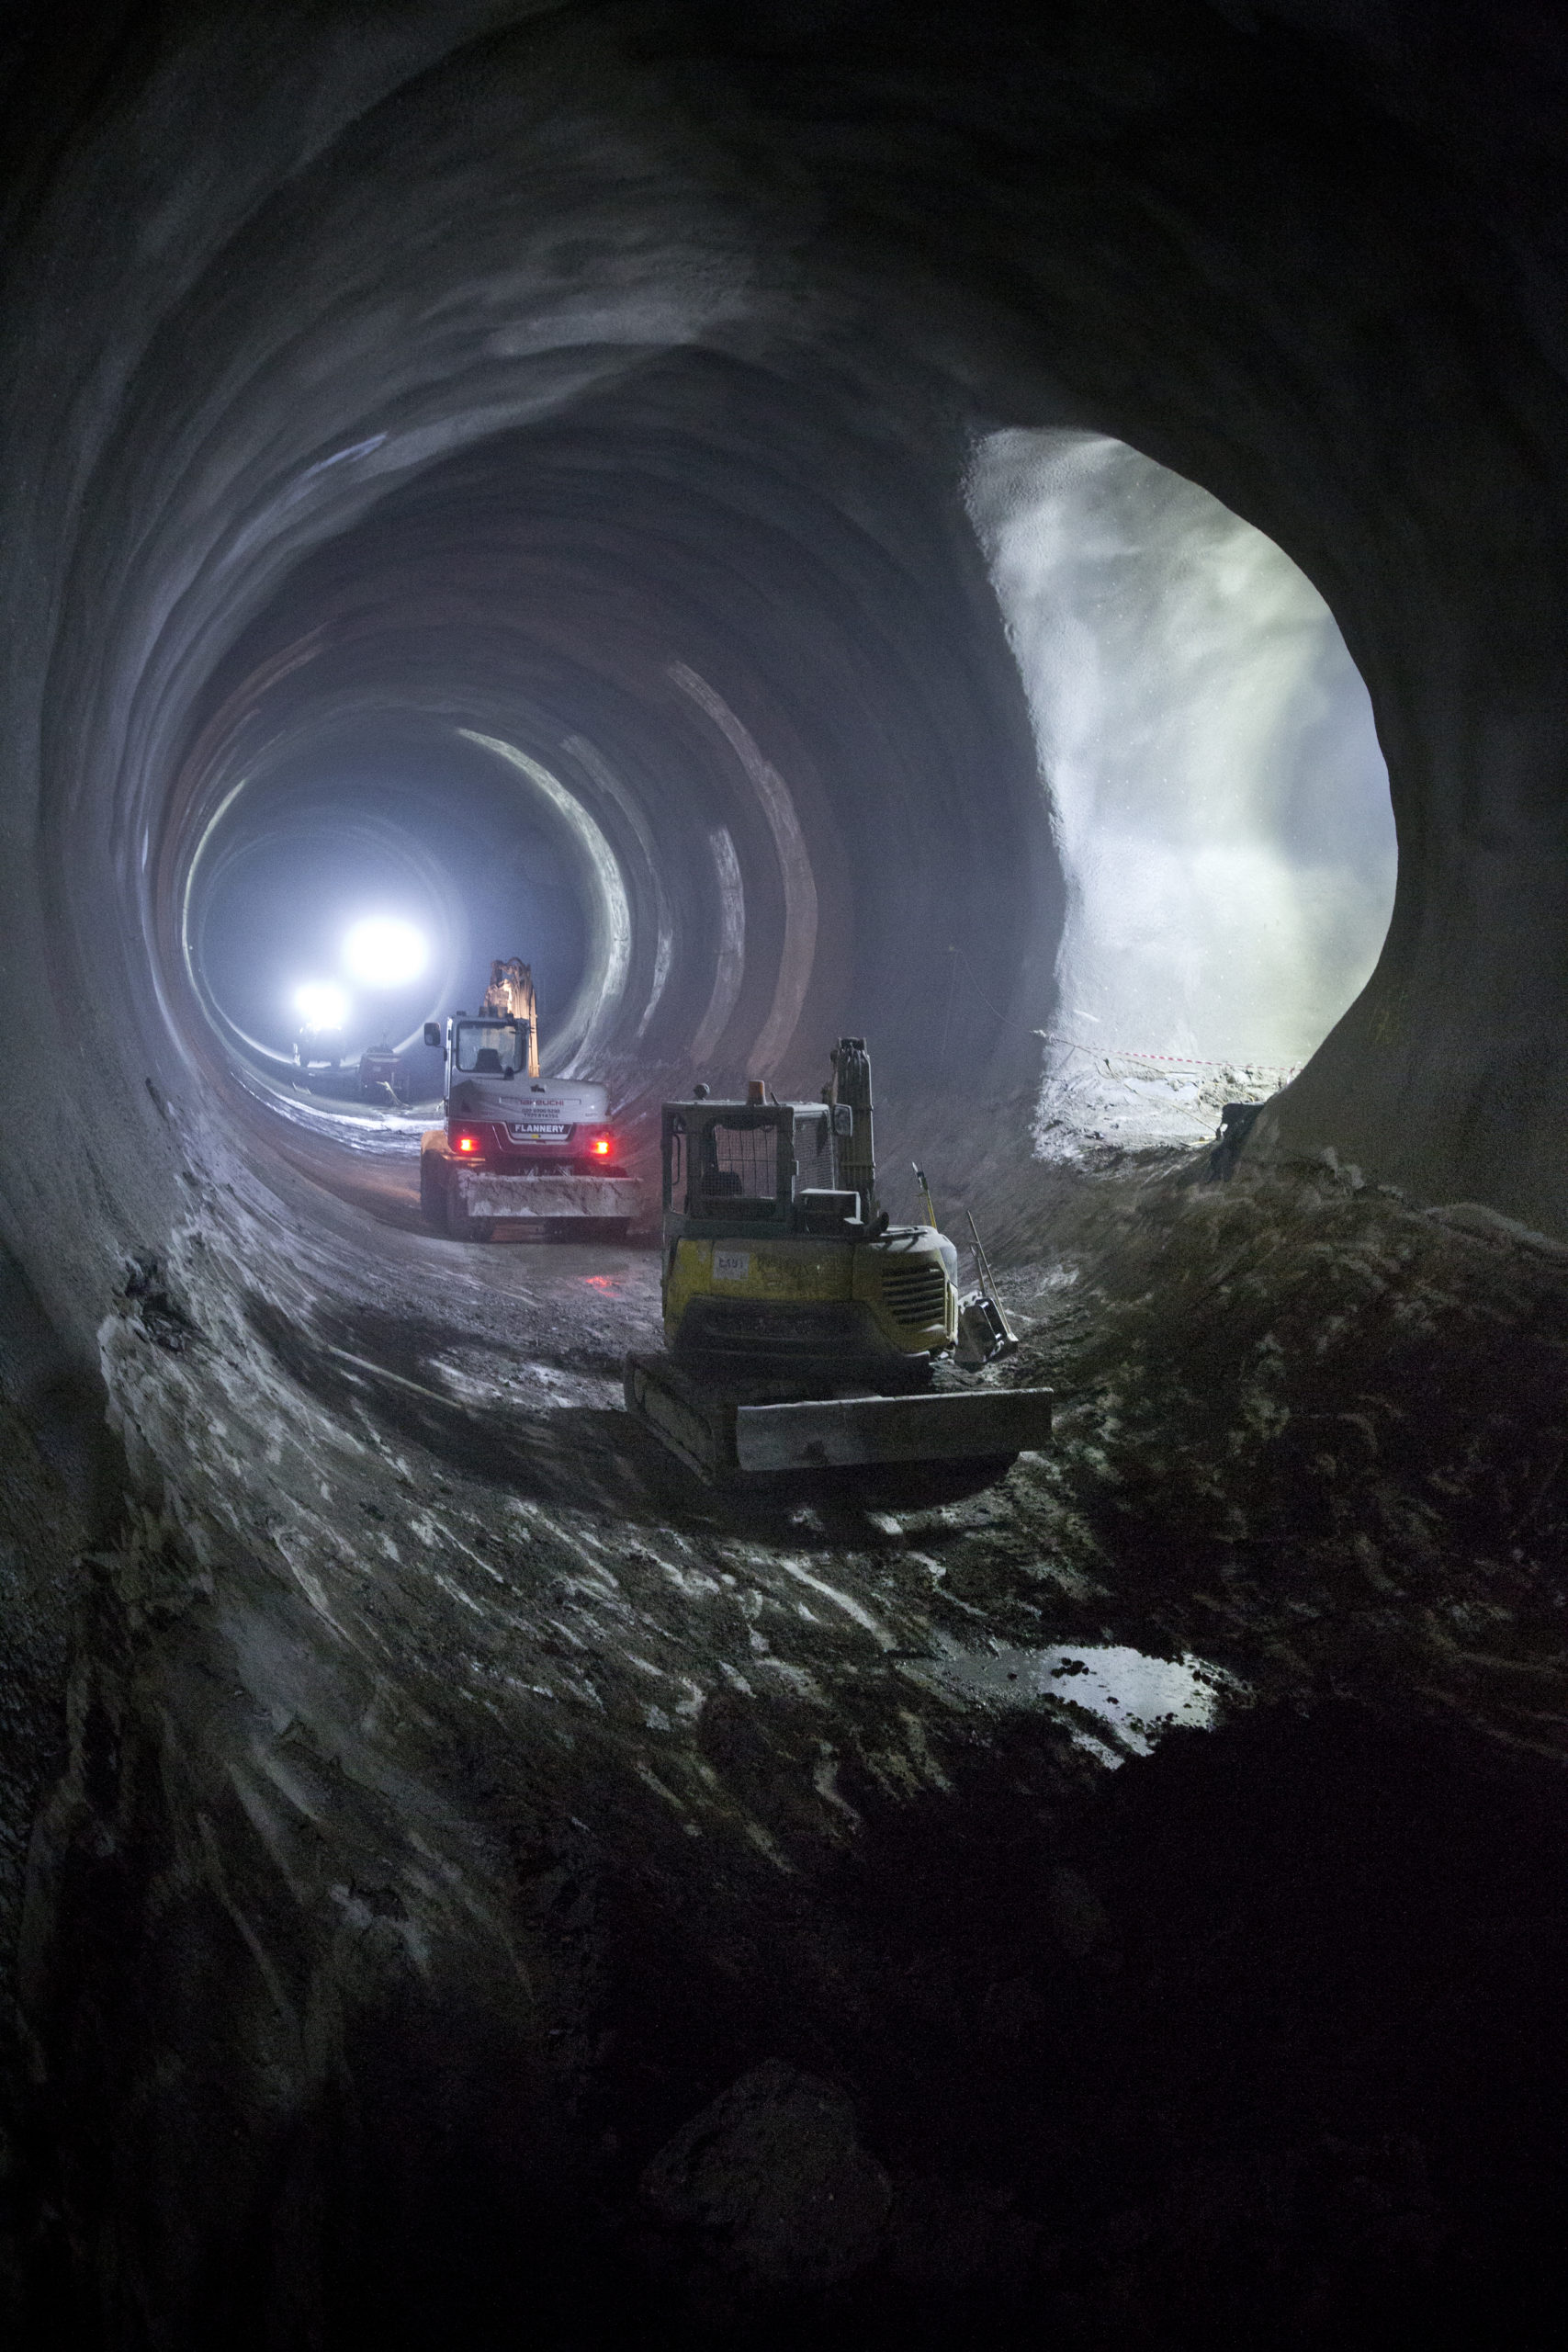 Inside The Vast Tunnels Of Europe’s Biggest Infrastructure Project 